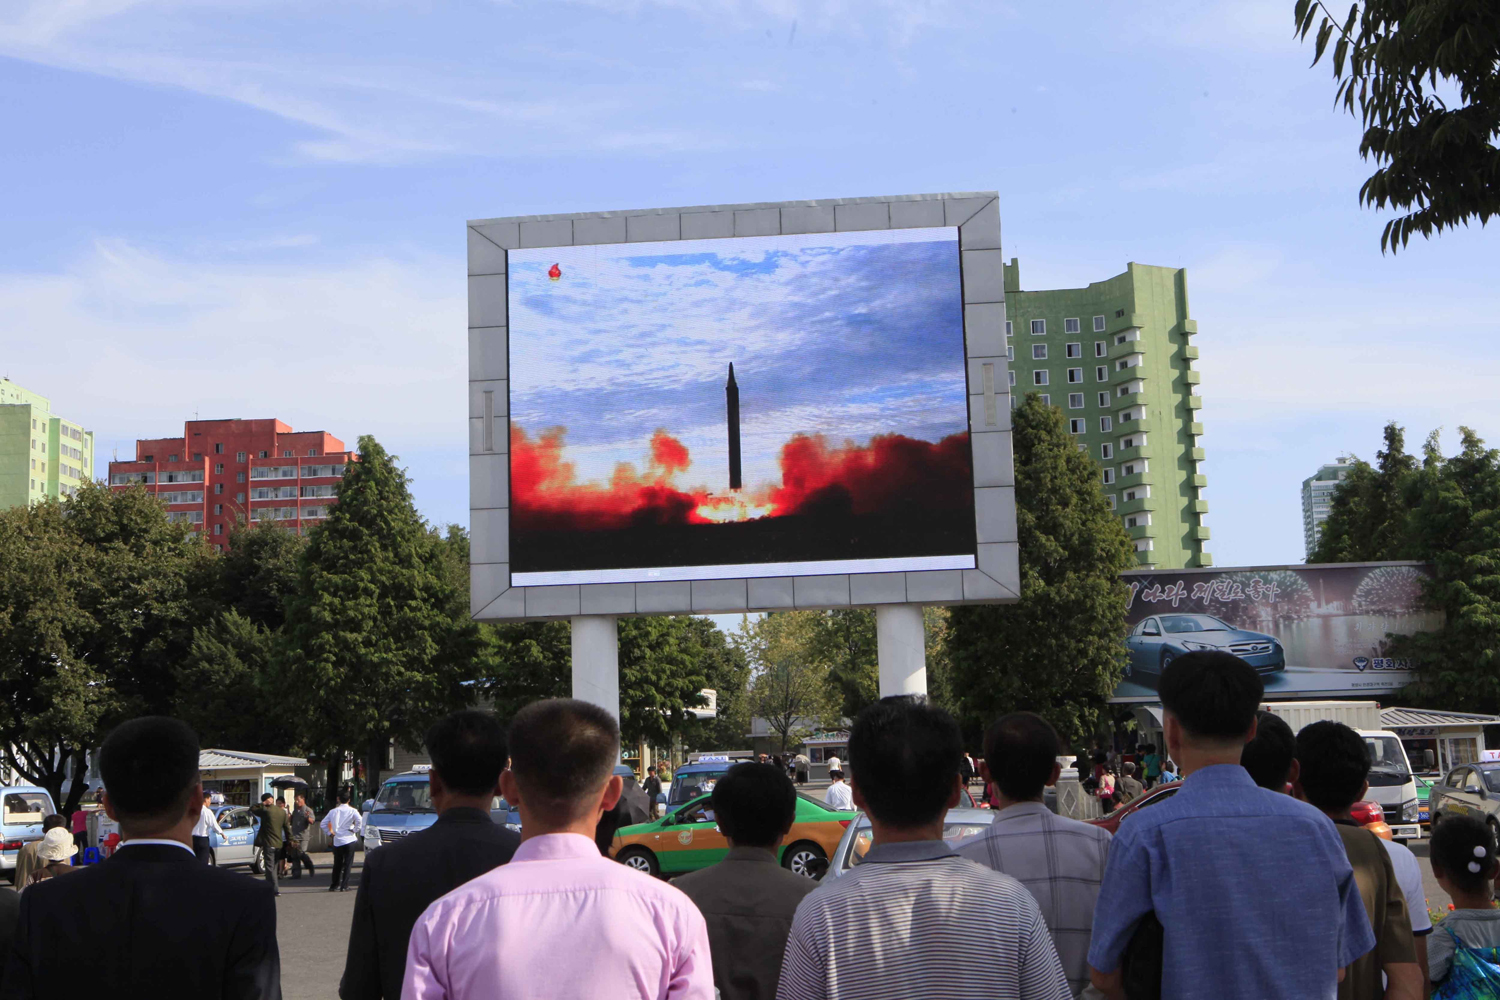 People watch a launching of a Hwasong-12 strategic ballistic rocket aired on a public TV screen at the Pyongyang Train Station in Pyongyang, North Korea, Saturday, Sept. 16, 2017. (Jon Chol Jin/AP)